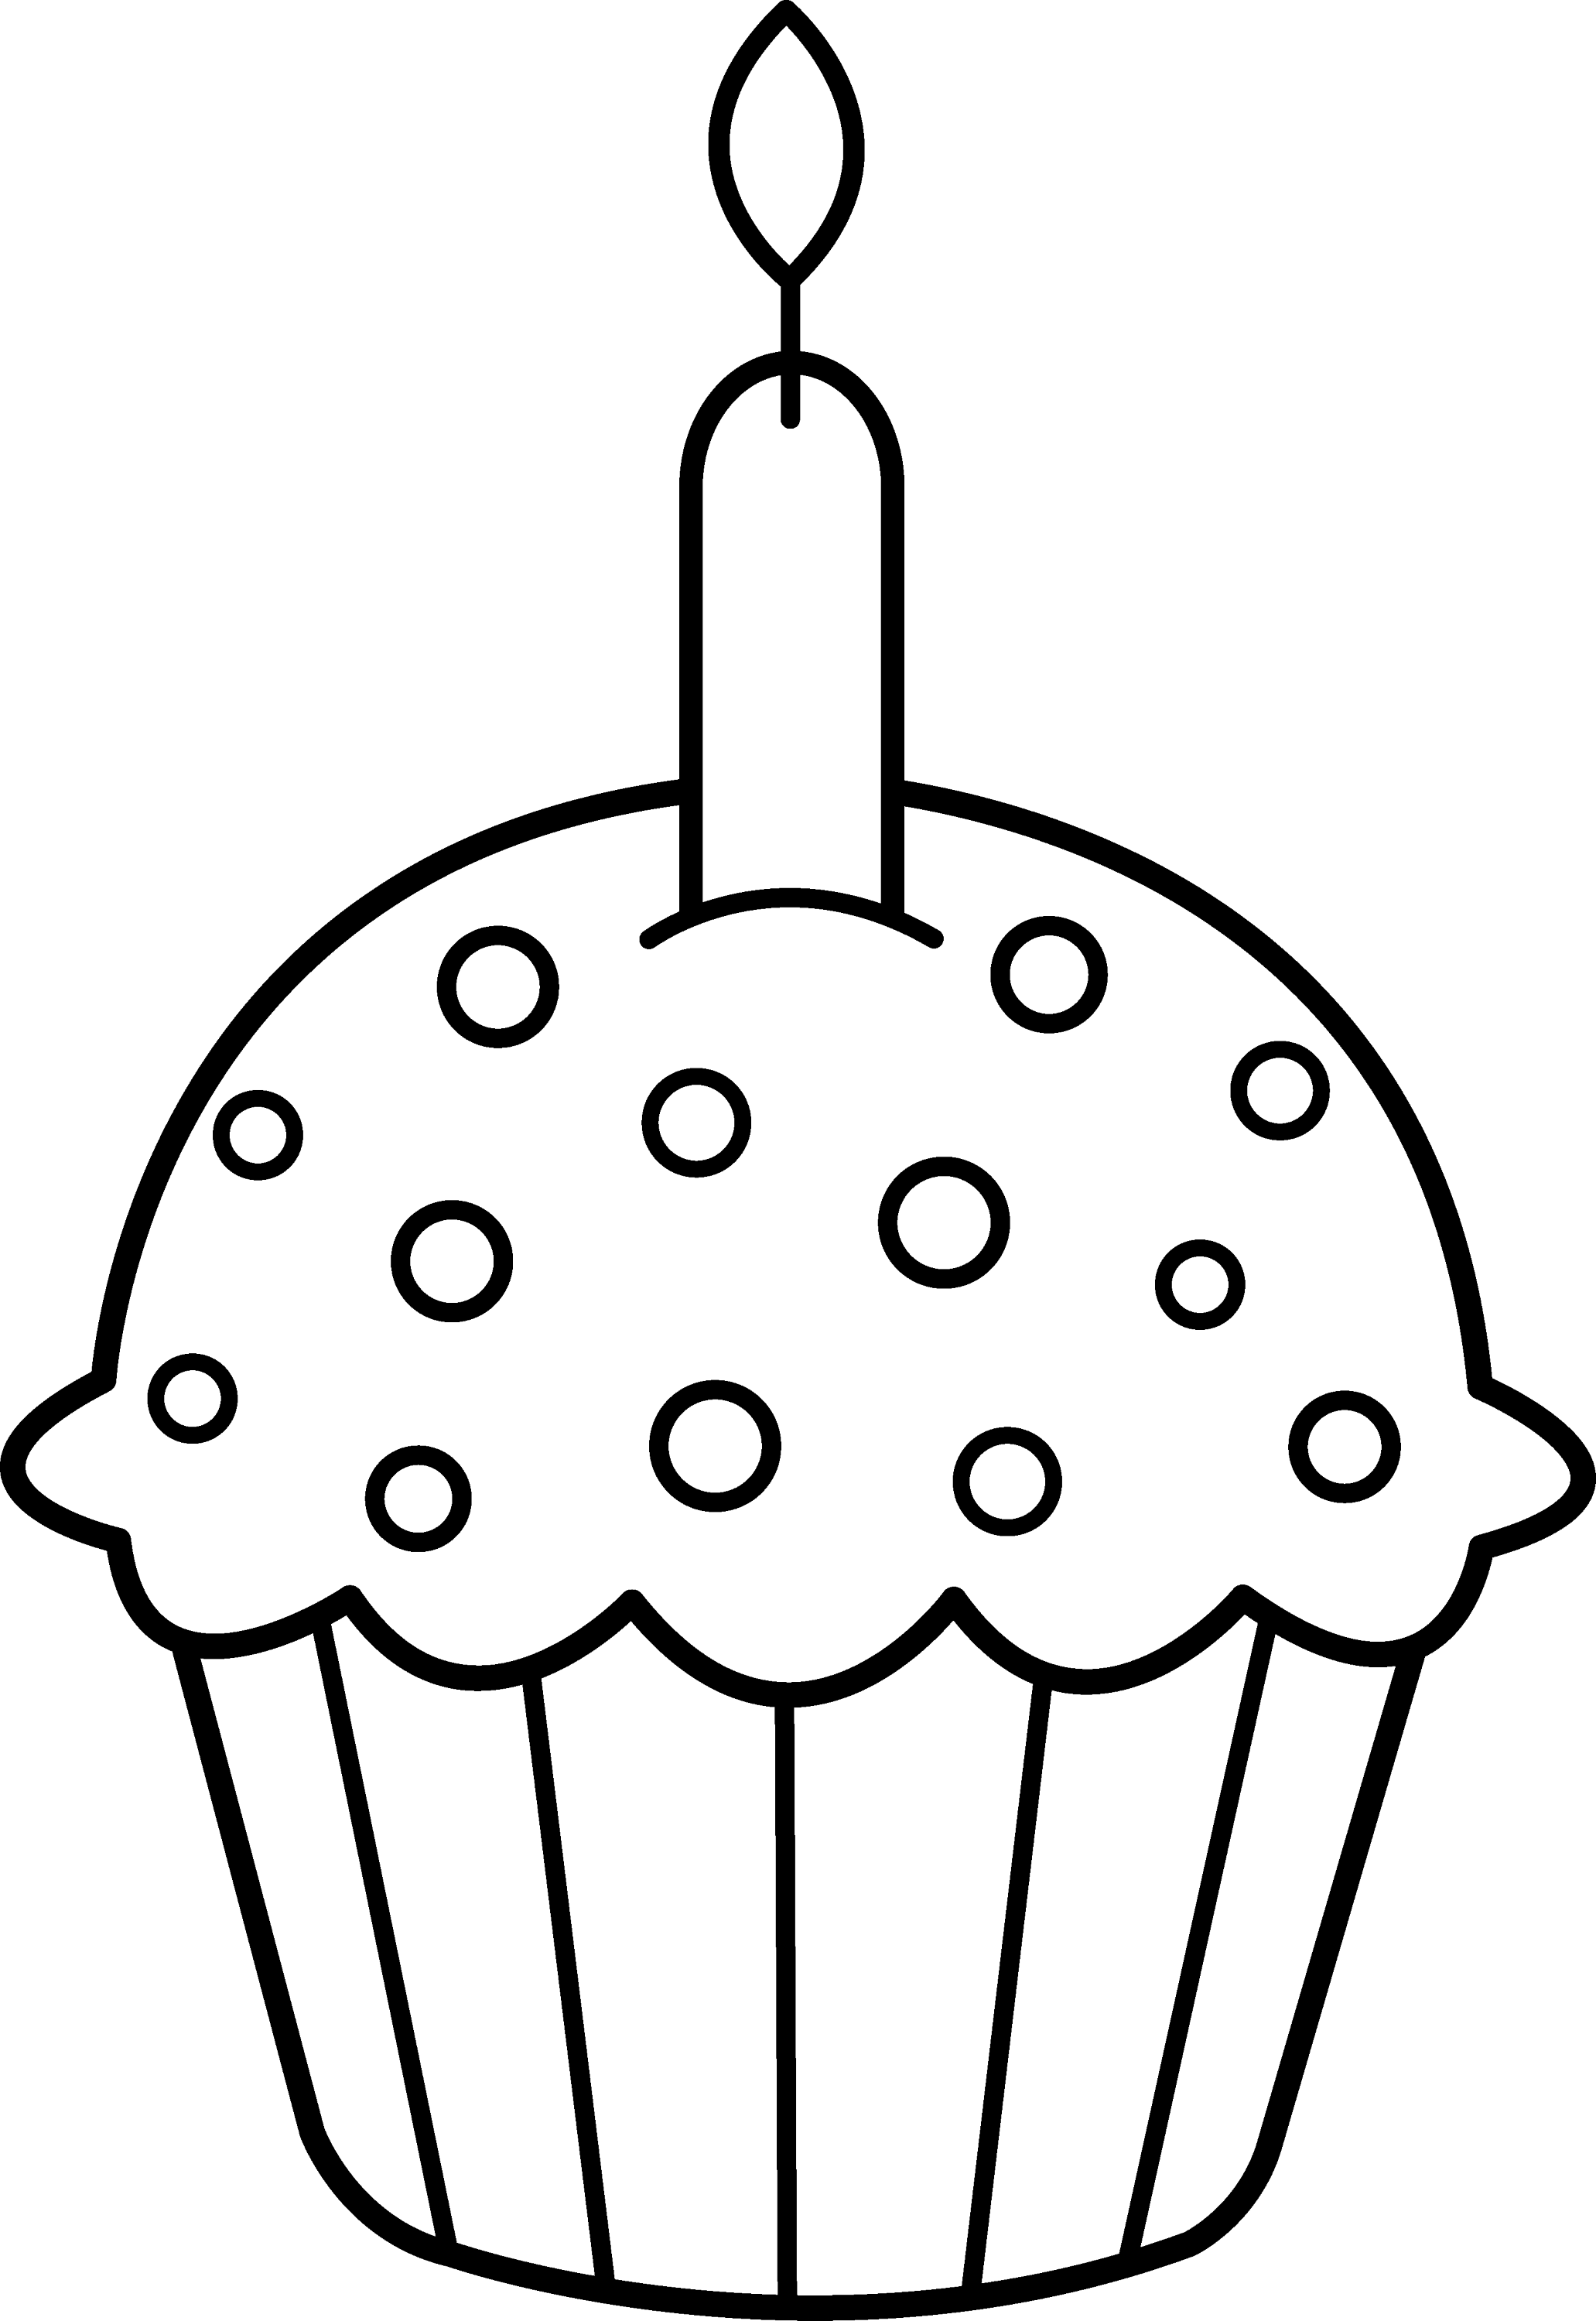 Download Birthday Cupcake Coloring Page - Free Clip Art